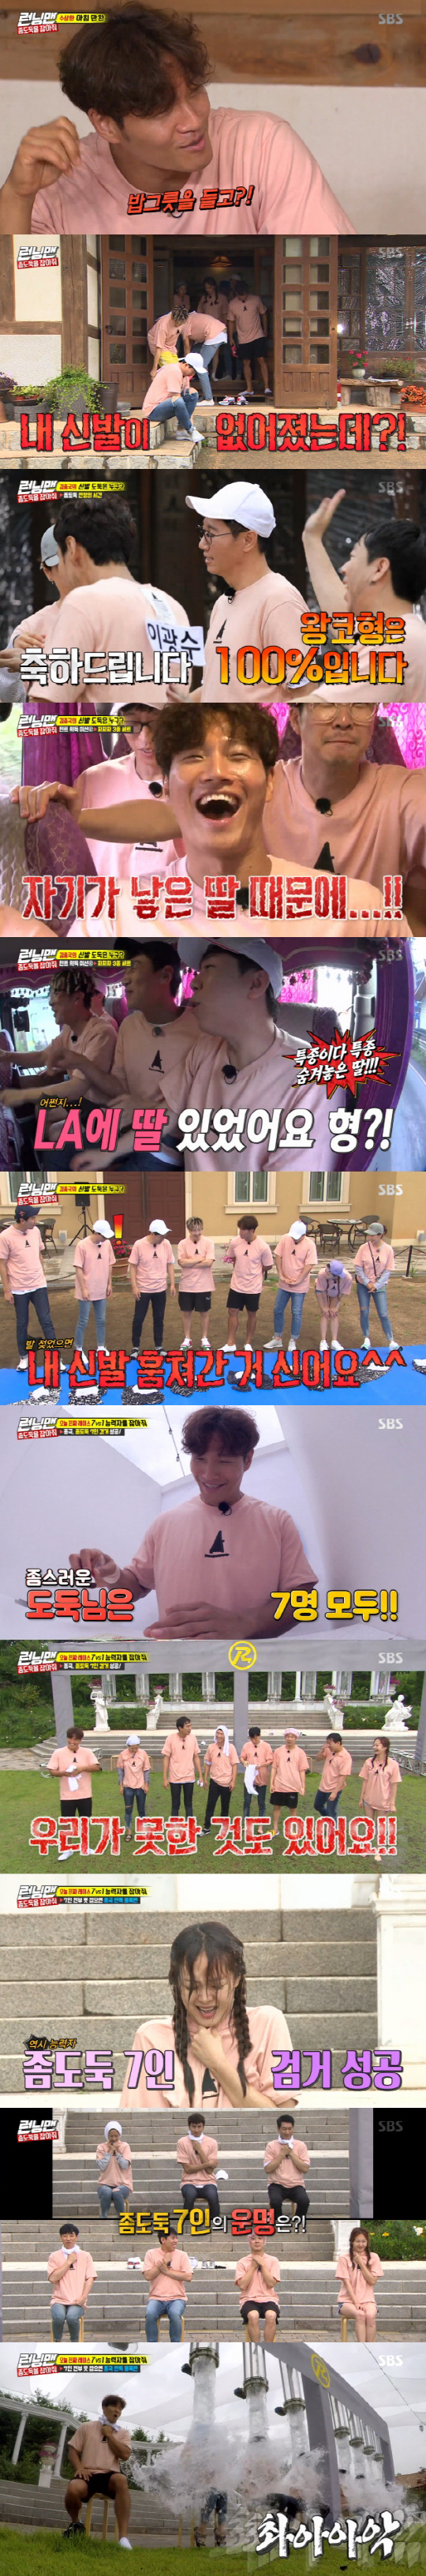 Kim Jong-kook arrested The Little Thief party to avoid water bomb penalties.On SBS Running Man broadcast on the 29th, singer Kim Jong-kooks Hope was released.At the opening, the crew had a breakfast dinner at a limited restaurant for the hard-working cast, but the cast members doubted what the crew continued to lose, saying, Its a prize.Kim Jong-kooks shoes disappeared as he headed to the yard for the real opening.Here, a mission called Get The Little Thief You Stealed unfolded: PD Get me some of The Little Thiefs body hints.If you unanimously arrest The Little Thief, its a success.The arrested Little Thief will carry out water bomb penalties, and on the contrary, all members will receive water bomb penalties when they fail. Running Man members all suspected Ji Suk-jin as a spy, as he was the only one to stand up with a bowl of rice during the meal.Running Man then succeeded in a hint-taking mission with the Bubbling mission, which was a mobile mission; the crew released a photo of the criminal with a slightly black spot on the upper elbow.An elbow search led to another suspicion of Ji Suk-jin.In addition, a Random 5-second Talk mission was given to answer three random questions about members within 5 seconds.Here Haha challenged and said, Why does Kim Jong-kook often go to LA?Haha answered the last third answer, saying, I have a daughter hidden in LA. Kim Jong-kook, who wrote an unfair falsification, said, I suddenly thought I wanted to have a real daughter in LA.Then I will go to see you every day... Then Ji Suk-jin laughed, Do you have a real daughter?, and Kim Jong-kook responded, Give me your shoes, causing a laugh.A photo of The Little Thiefs body features has been released since the throwing away from the shoes pocket mission.Hints showed The Little Thief had clean hairless legs - as well as The Little Thiefs wrists were thick, narrowing to men.Everything was in a situation where it fits in with Ji Suk-jin.Get The Little Thief last mission was a punch quiz - the hand of the woman signing here was the hand of the woman.In the opening, Kim Jong-kook told Jeon So-min: Why give me flowers, not the one who gives me flowers, not the one who gives me.Why did you try to sit next to me? An anecdote about an hour before the shoot was released here, and it turns out that all members except Kim Jong-kook were released as The Little Thief.The crew said, Even if it was 2-1, 3-1, I did not win Kim Jong-kook.This time, we gave him the opportunity to catch Kim Jong-kook, a talented person with a 7-1 lead. However, the production team explained, Kim Jong-kooks shoes are relayed one by one.It is a success if you move down one by one after putting it on the top of the shoe field and move to the car. The Little Thief had been suspected of being one, but as all members were members of The Little Thief, the main characters in the photographs were identified as different members.Kim Jong-kook, who has become increasingly strange, said, I do not think this is one person. He said, I do not talk too much.I thought, Murder, when I was doing She Wrote, did not you say that Ji Suk-jin is all if it is not one of my brothers? The members were embarrassed and did not know what to do.In the end, Kim Jong-kook succeeded in arresting the criminal of The Little Thief 7 with sharp Murder, She Wrote power.All seven members were penalized for water bombs. Yang Se-chan won the Gongjang penalty.